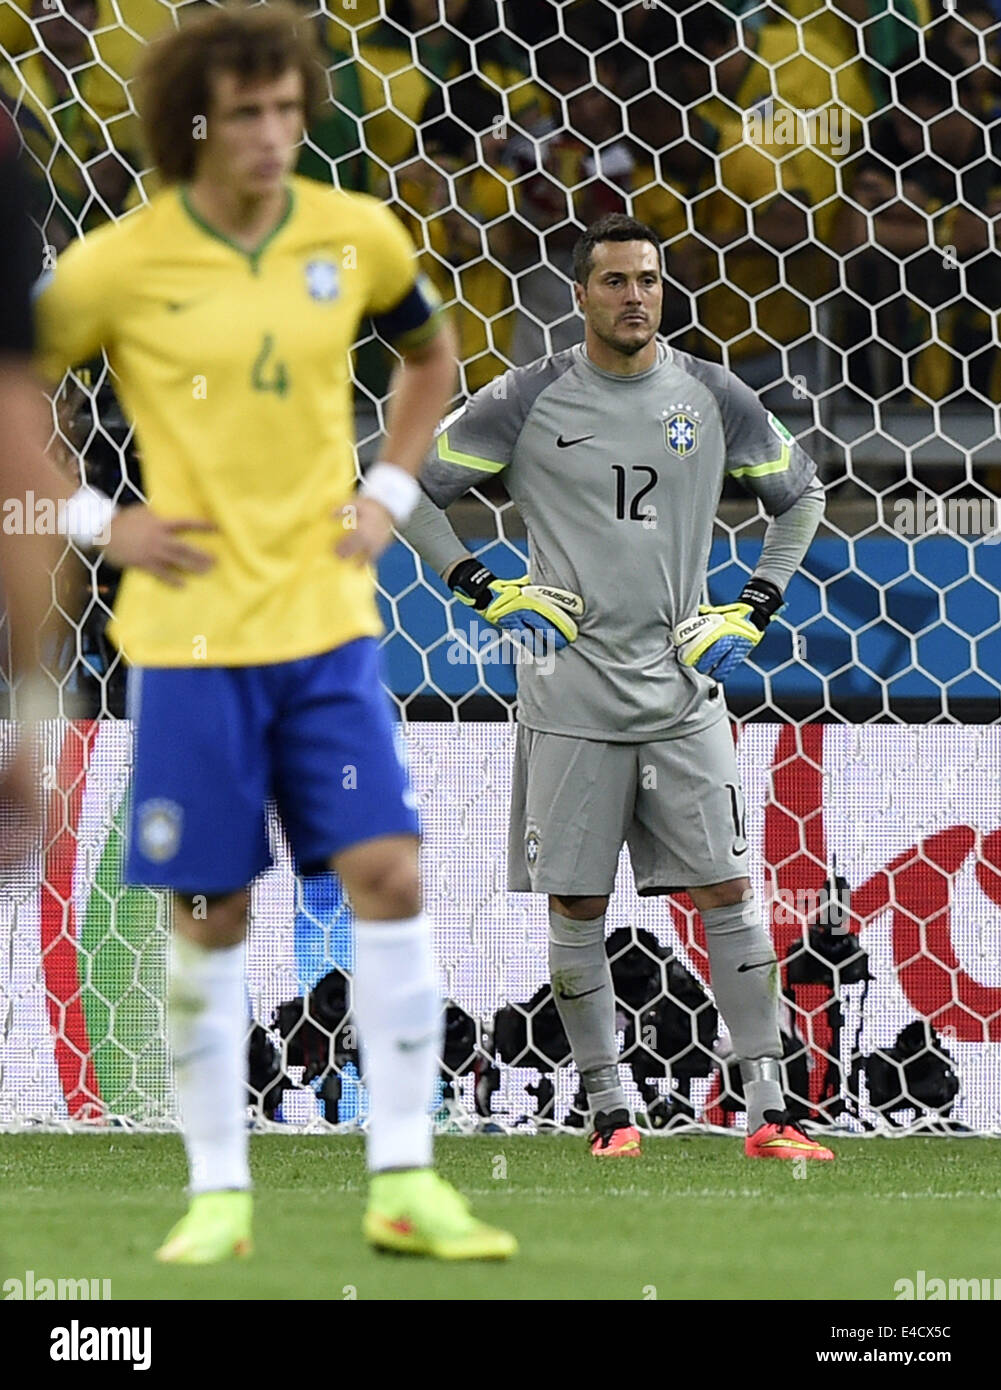 Belo Horizonte, Brazil. 8th July, 2014. Brazil's goalkeeper Julio Cesar (R) reacts during a semifinal match between Brazil and Germany of 2014 FIFA World Cup at the Estadio Mineirao Stadium in Belo Horizonte, Brazil, on July 8, 2014. Germany won 7-1 over Brazil and qualified for the final on Tuesday. Credit:  Qi Heng/Xinhua/Alamy Live News Stock Photo